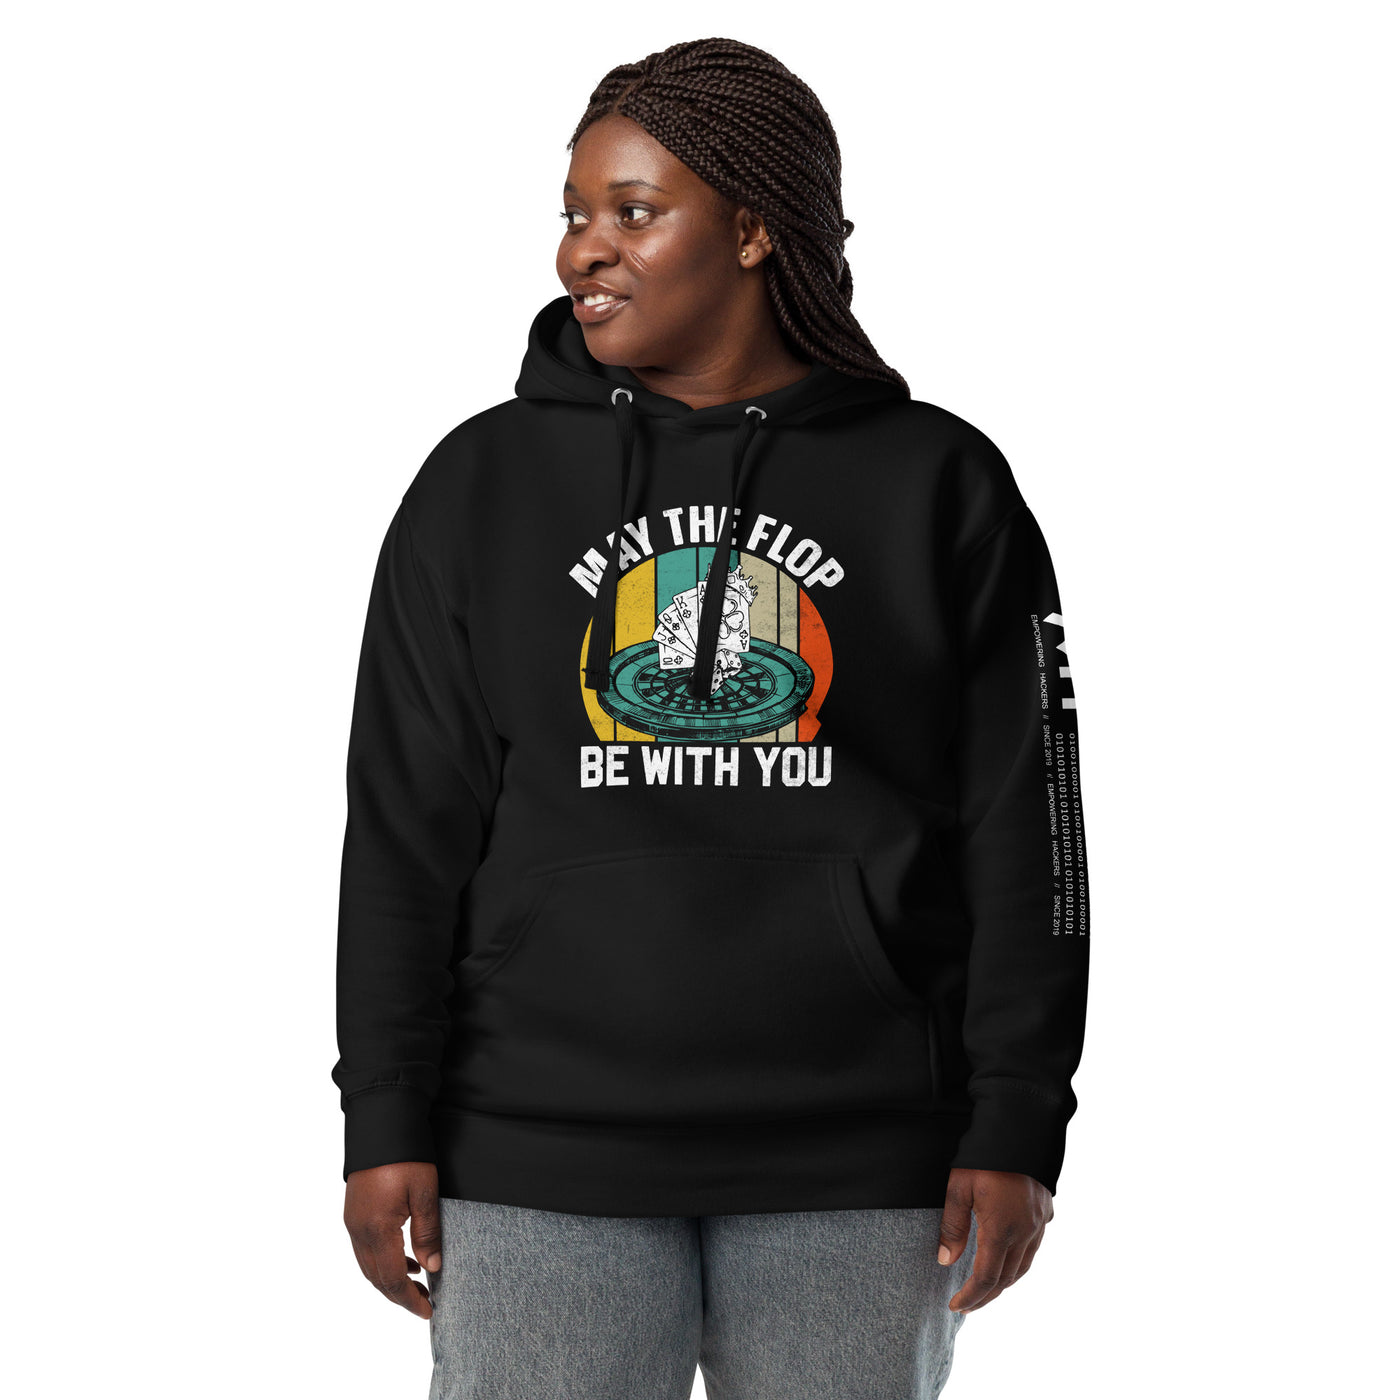 May the Flop be with you - Unisex Hoodie